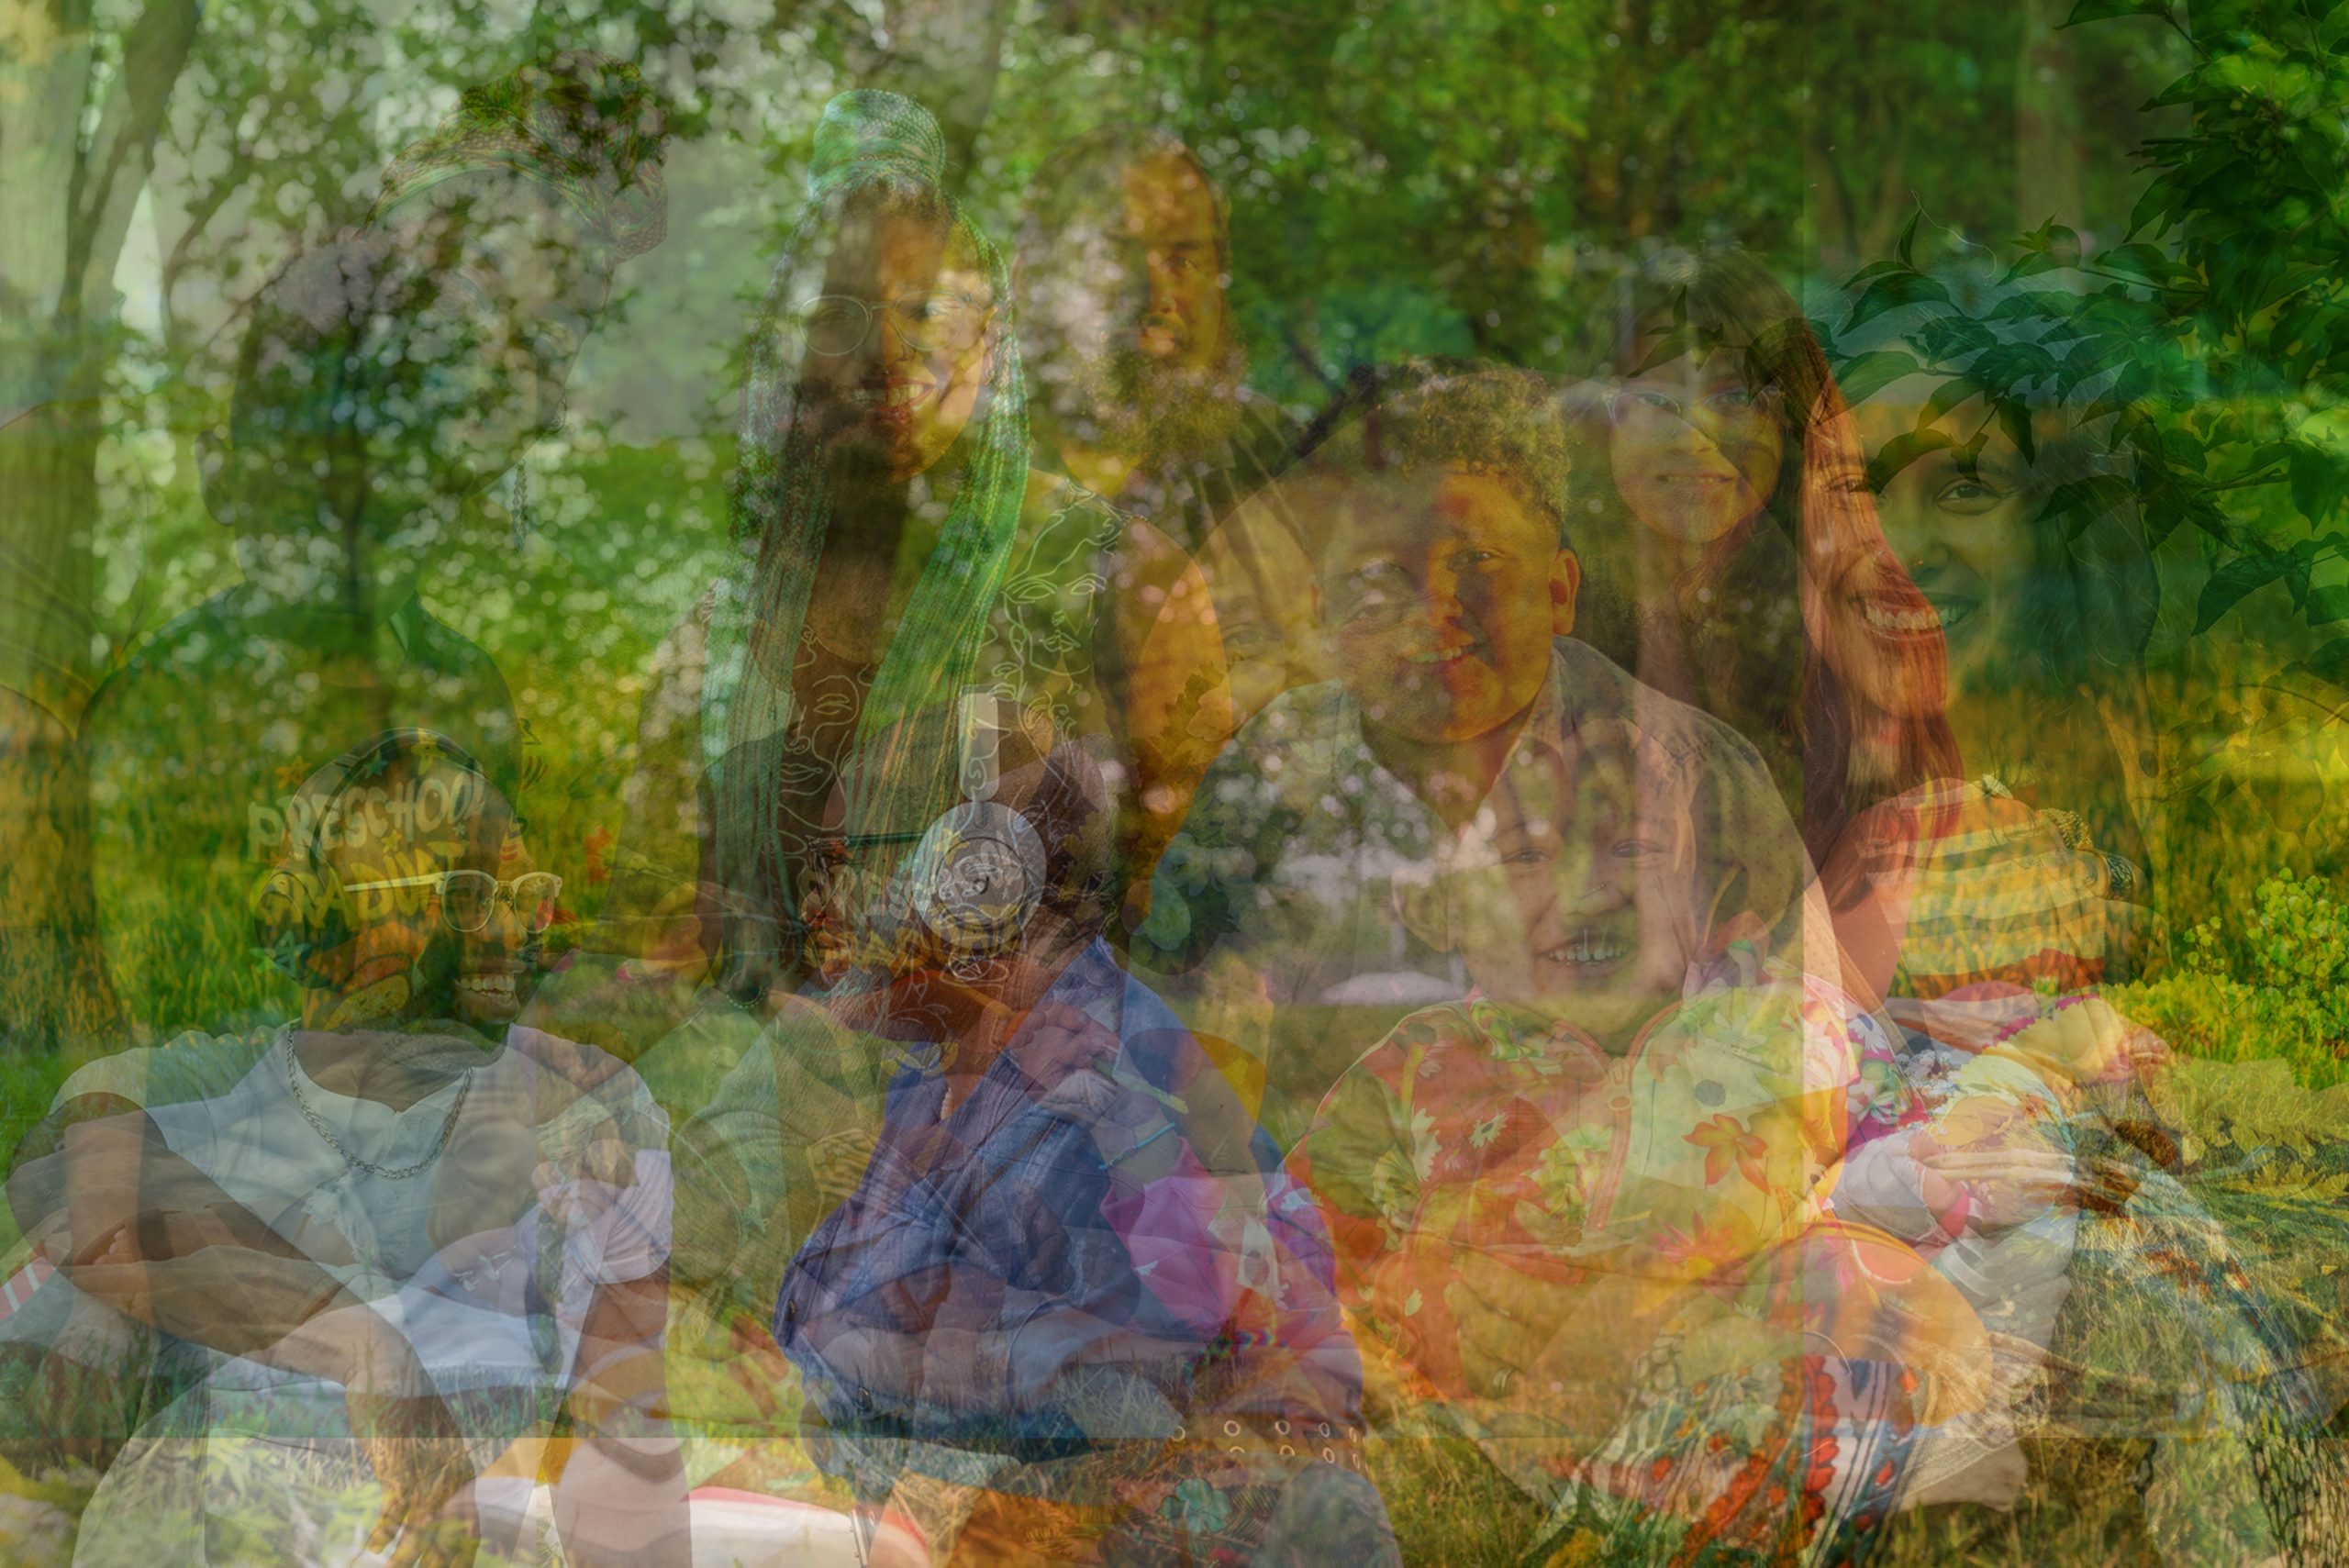 Image: A digital compilation of portraits against a background of lush plants in a park. The figures are transparent. Photo by Tonal Simmons.